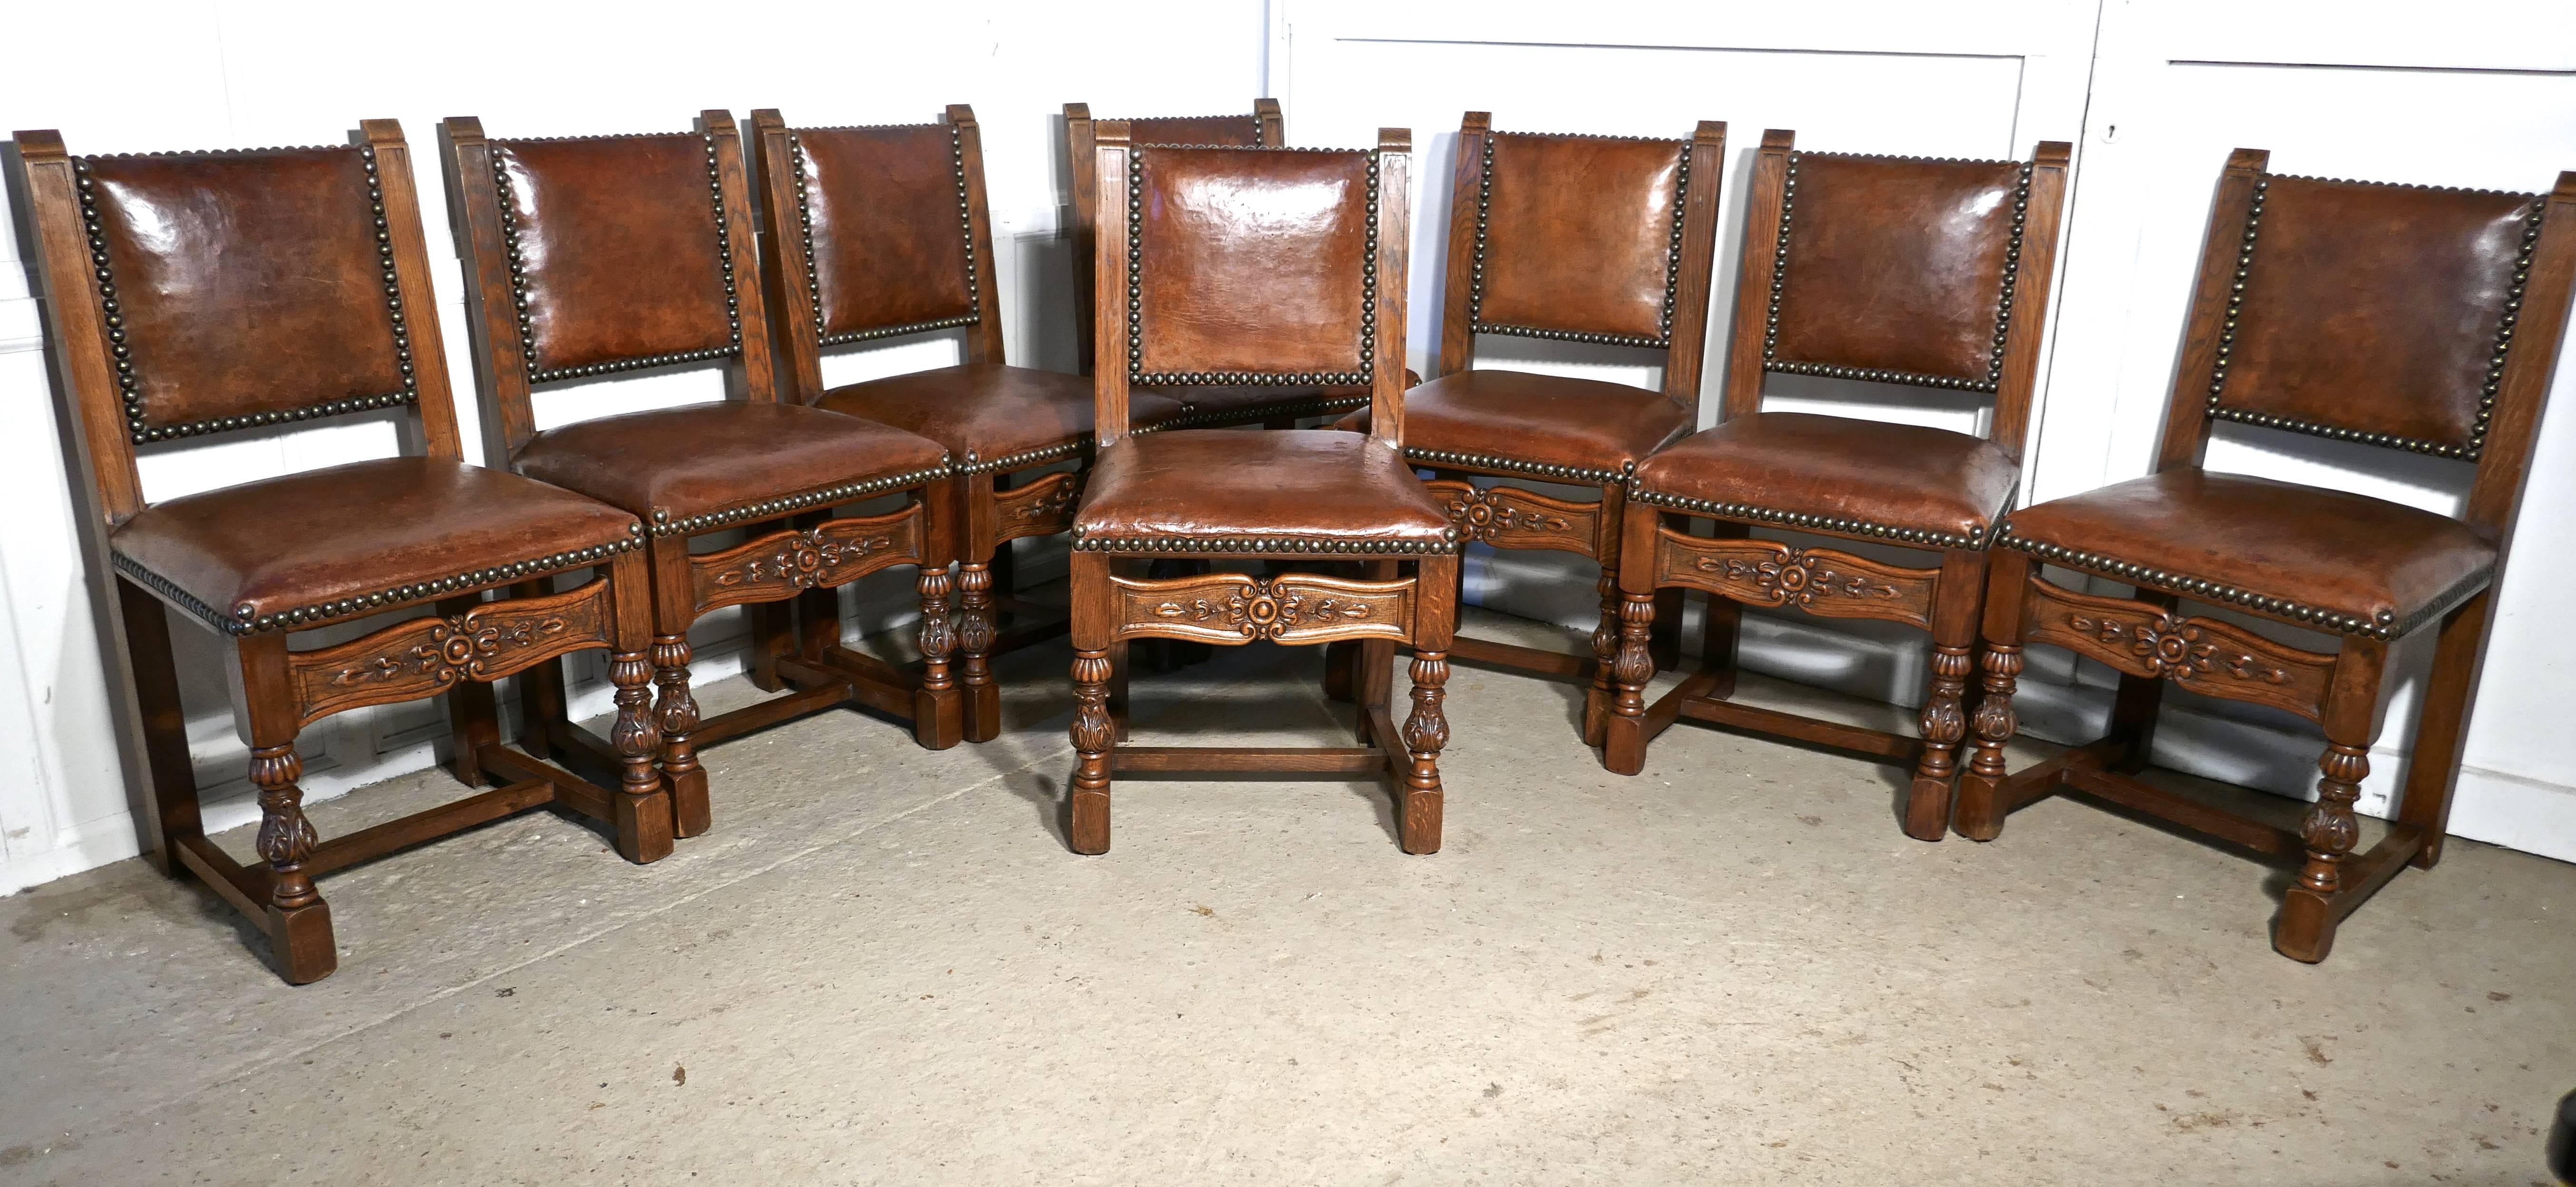 This is a very handsome good quality set of Cromwellian style dining chairs dating from 1880, the oak frames have caved front rails and the chunky front legs have acanthus leaf carvings
The chairs are upholstered in their original brass studded